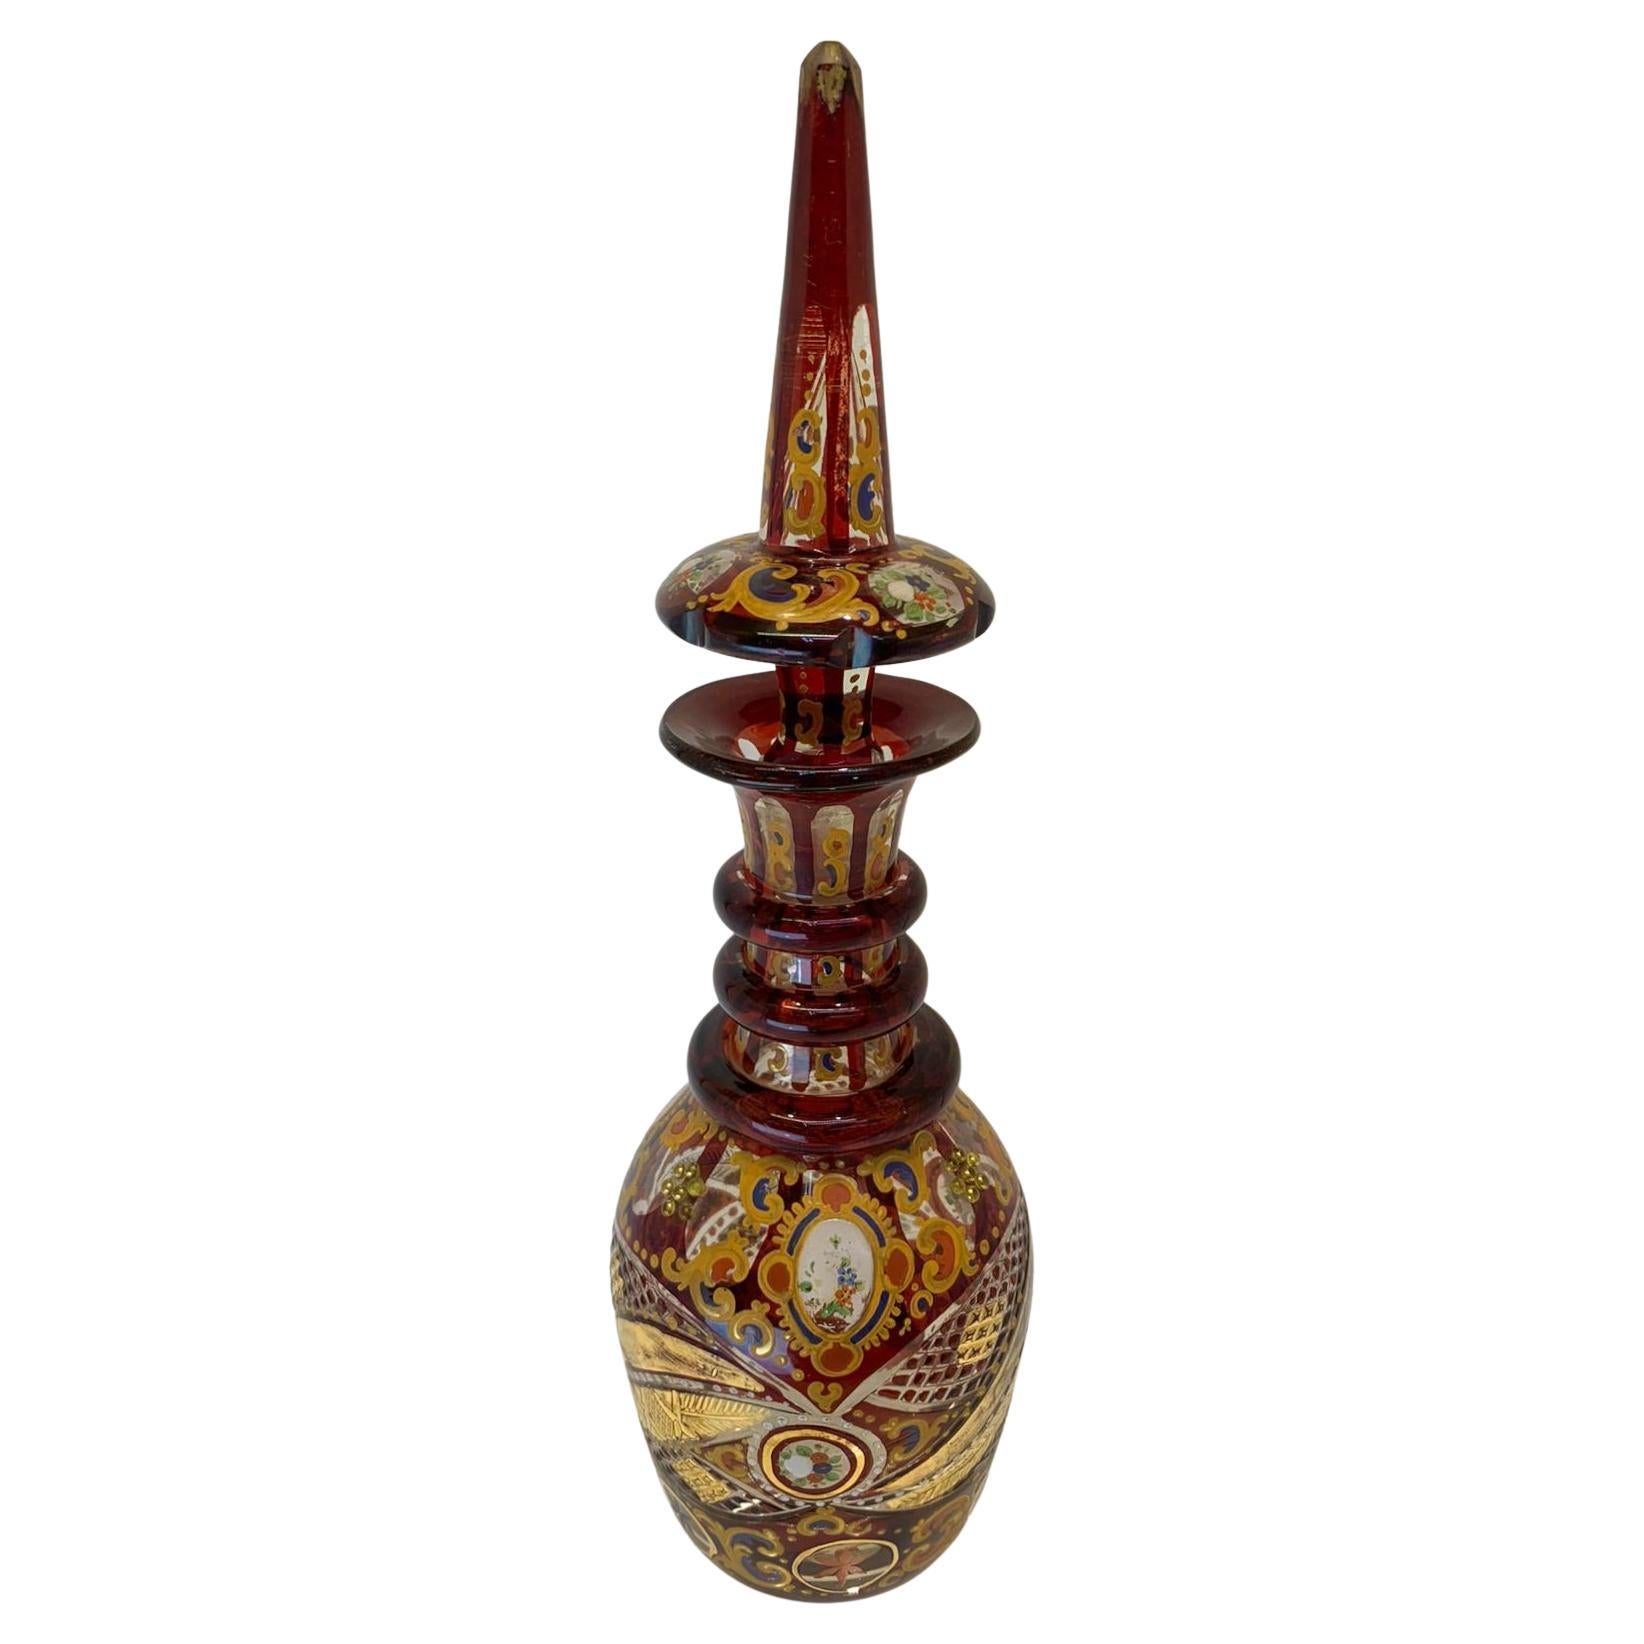 Antique Ruby Enamelled Glass Decanter, Bohemian for Islamic Market, 19th Century In Good Condition For Sale In Rostock, MV